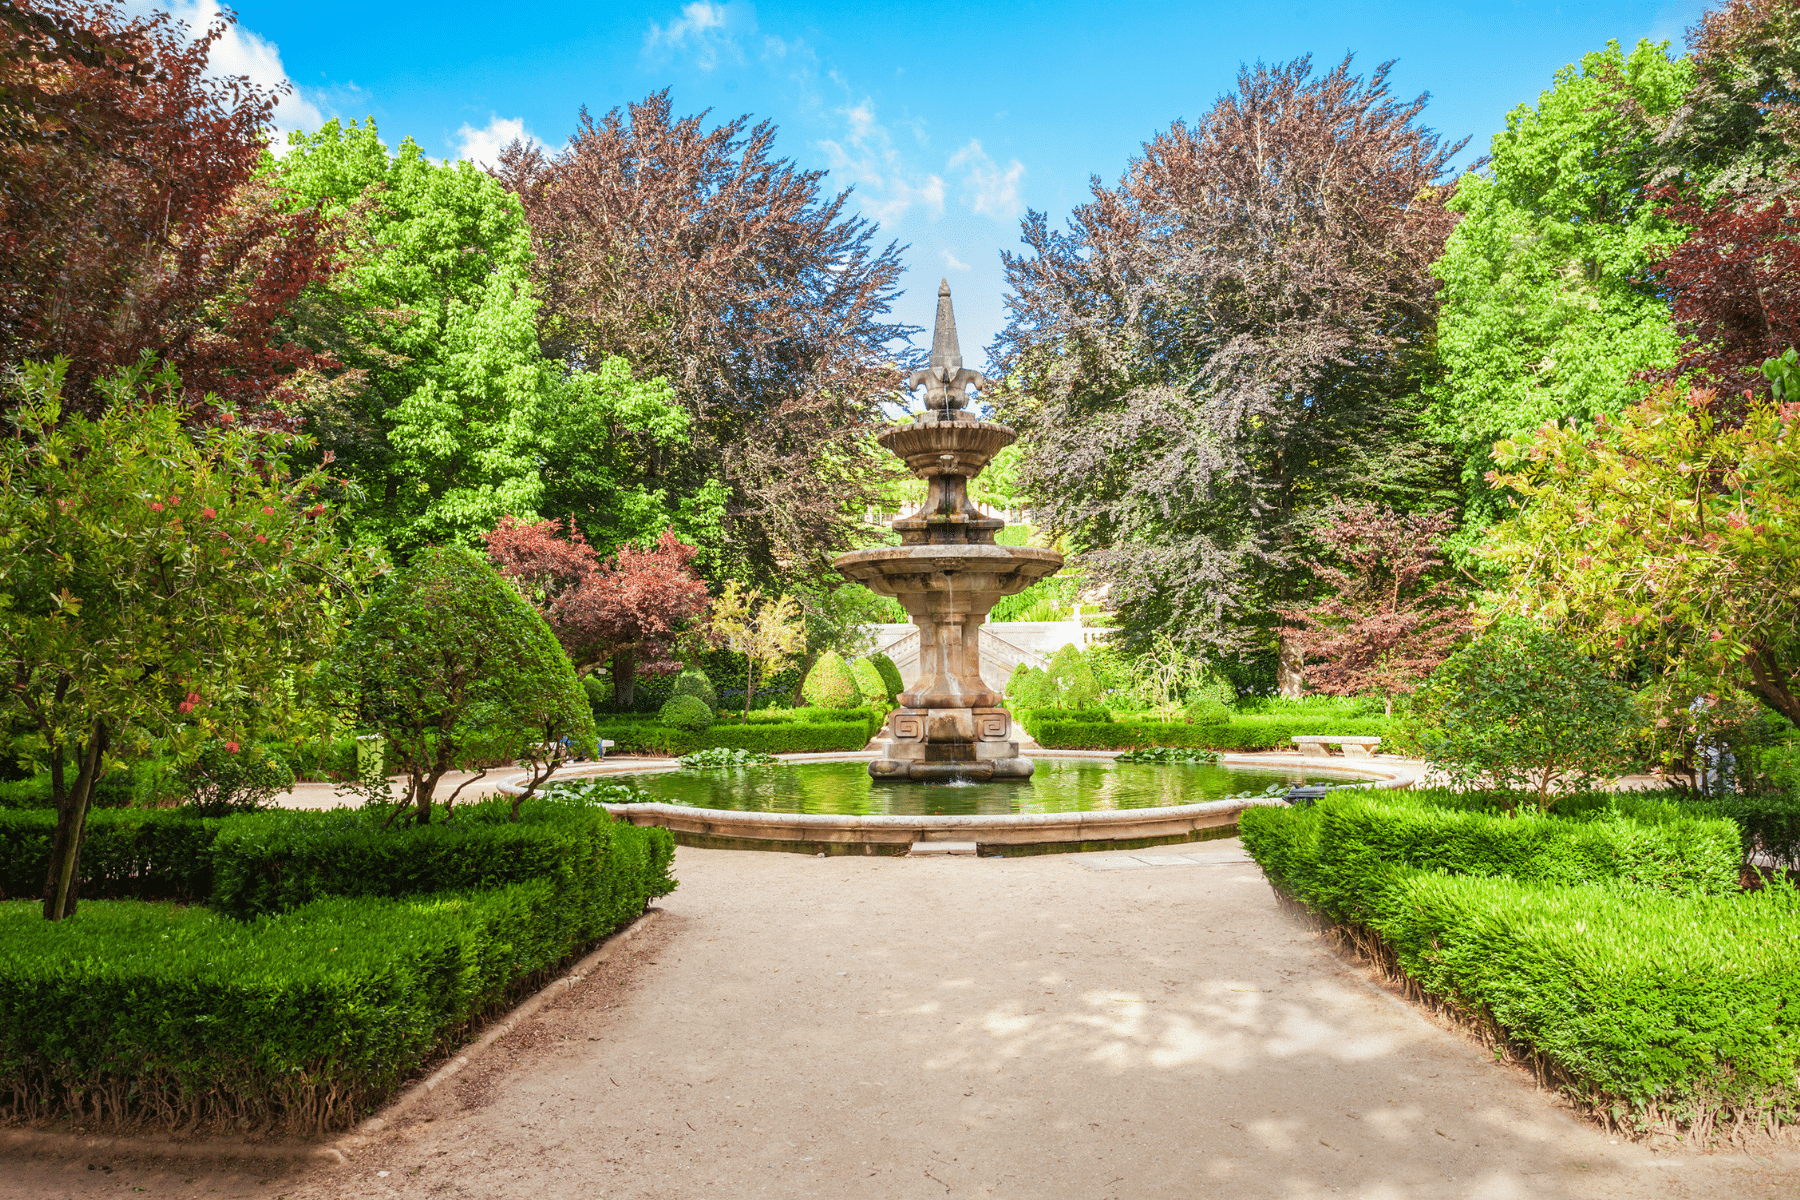 botanical gardens in Coimbra that has long Portuguese history with the old university of Coimbra